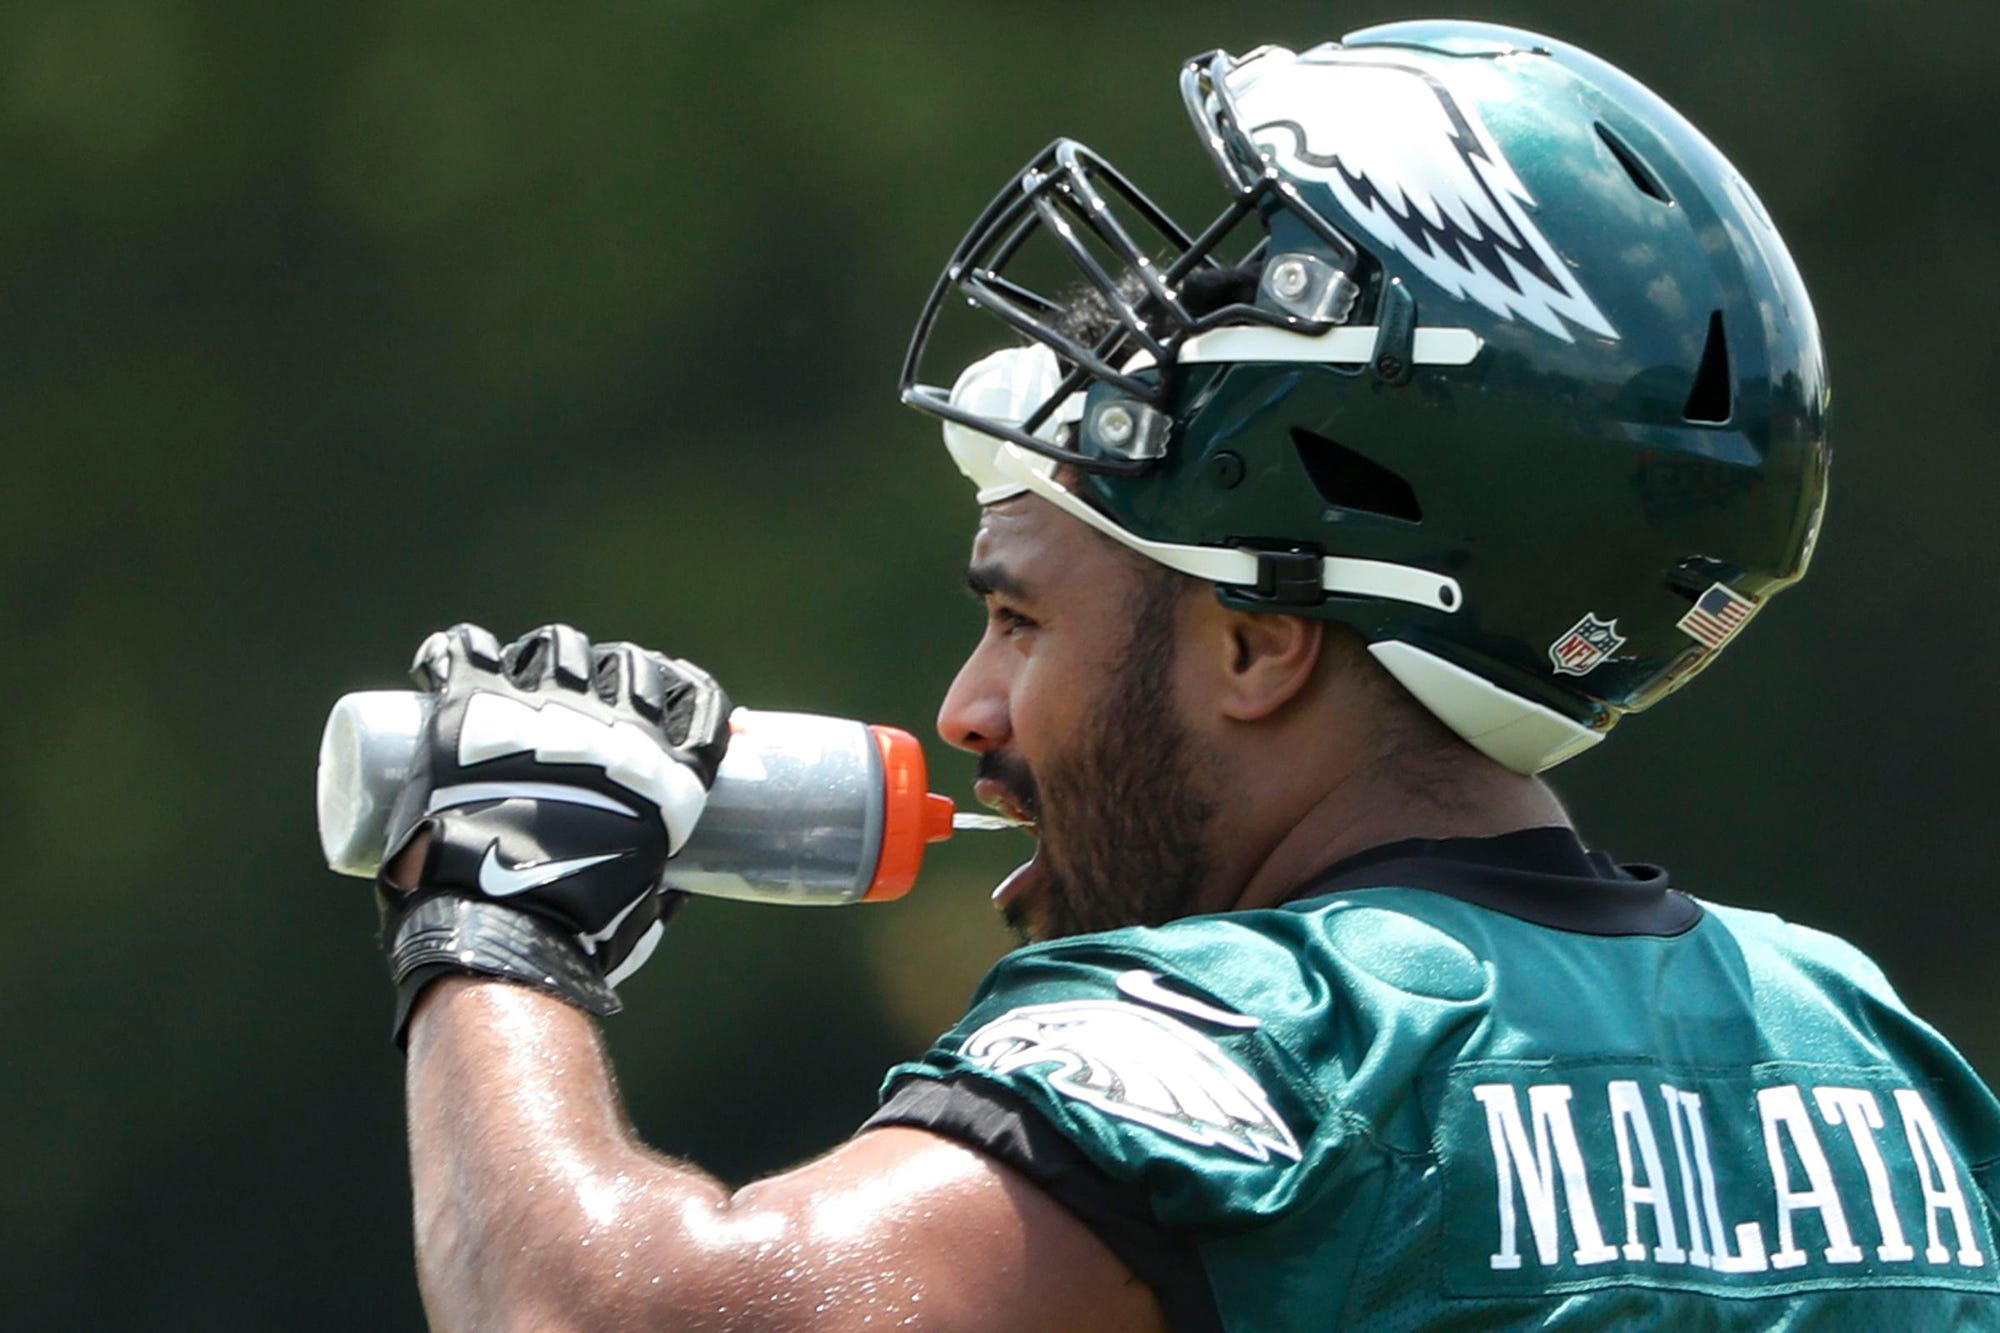 Philadelphia Eagles offensive tackle Jordan Mailata gets water during OTAs at the NovaCare Complex on June 8, 2022, in Philadelphia. (Heather Khalifa/The Philadelphia Inquirer/TNS)